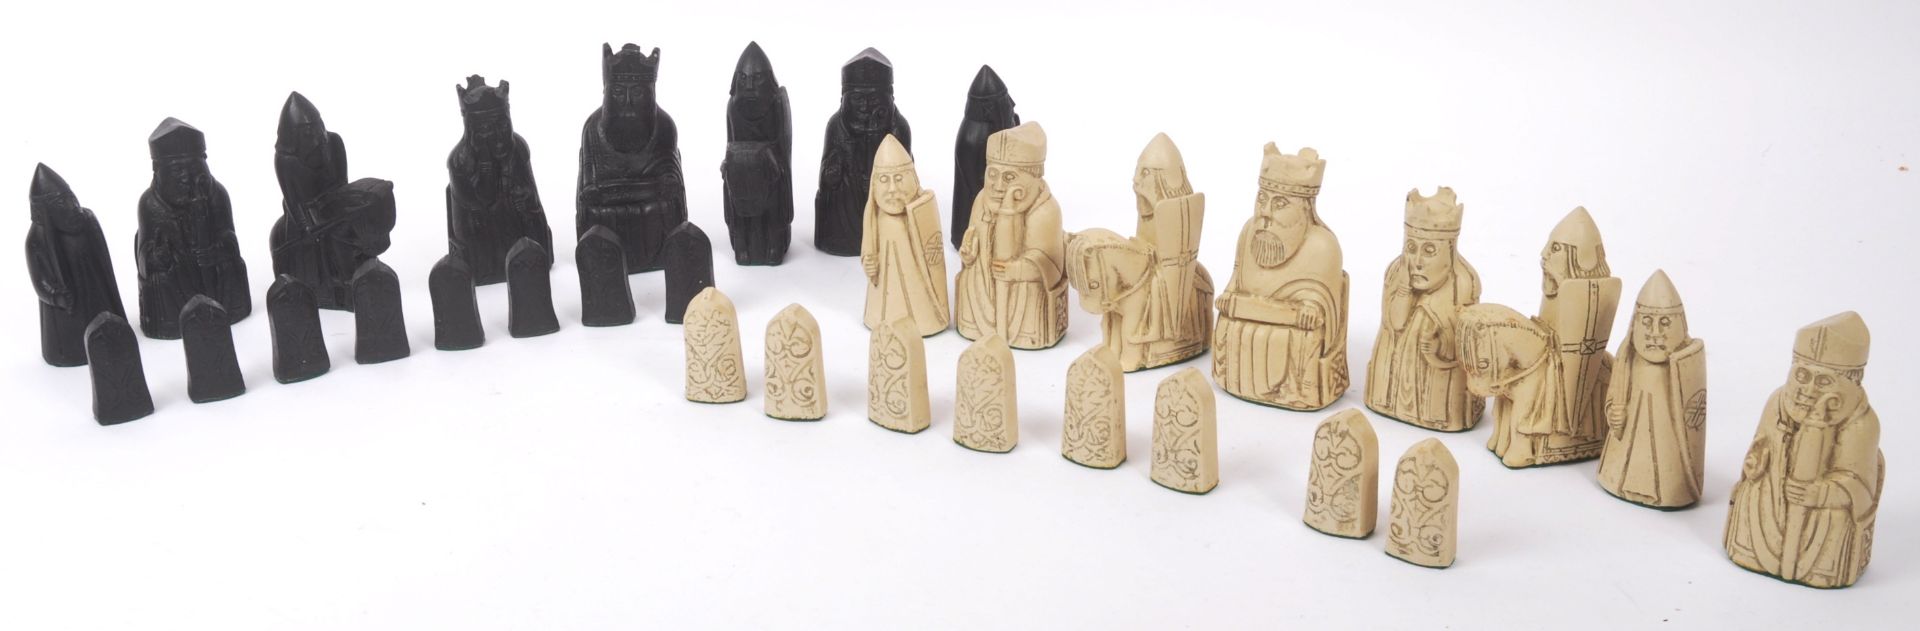 ISLE OF LEWIS RESIN REPRODUCTION CHESS SET